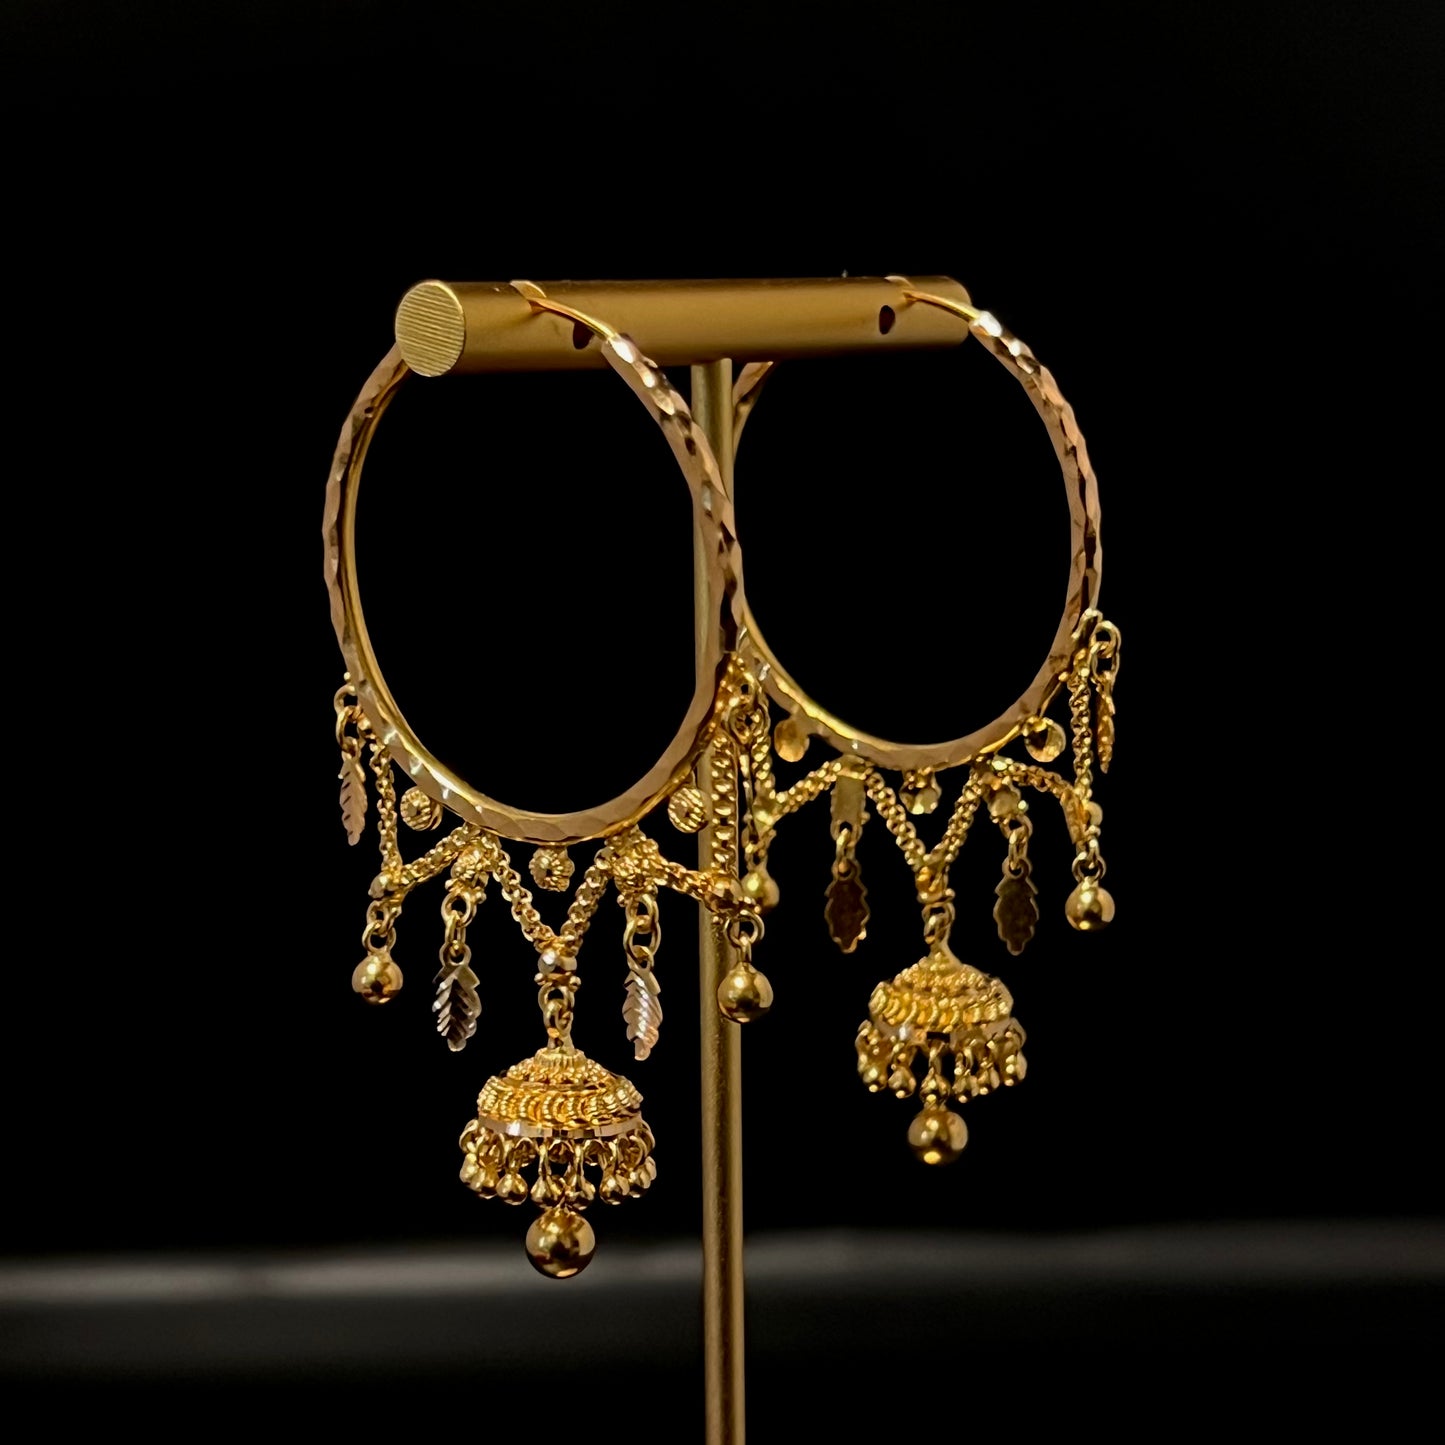 Golden Hoops with Jhumkas, Charms, and Golden Ghungroos